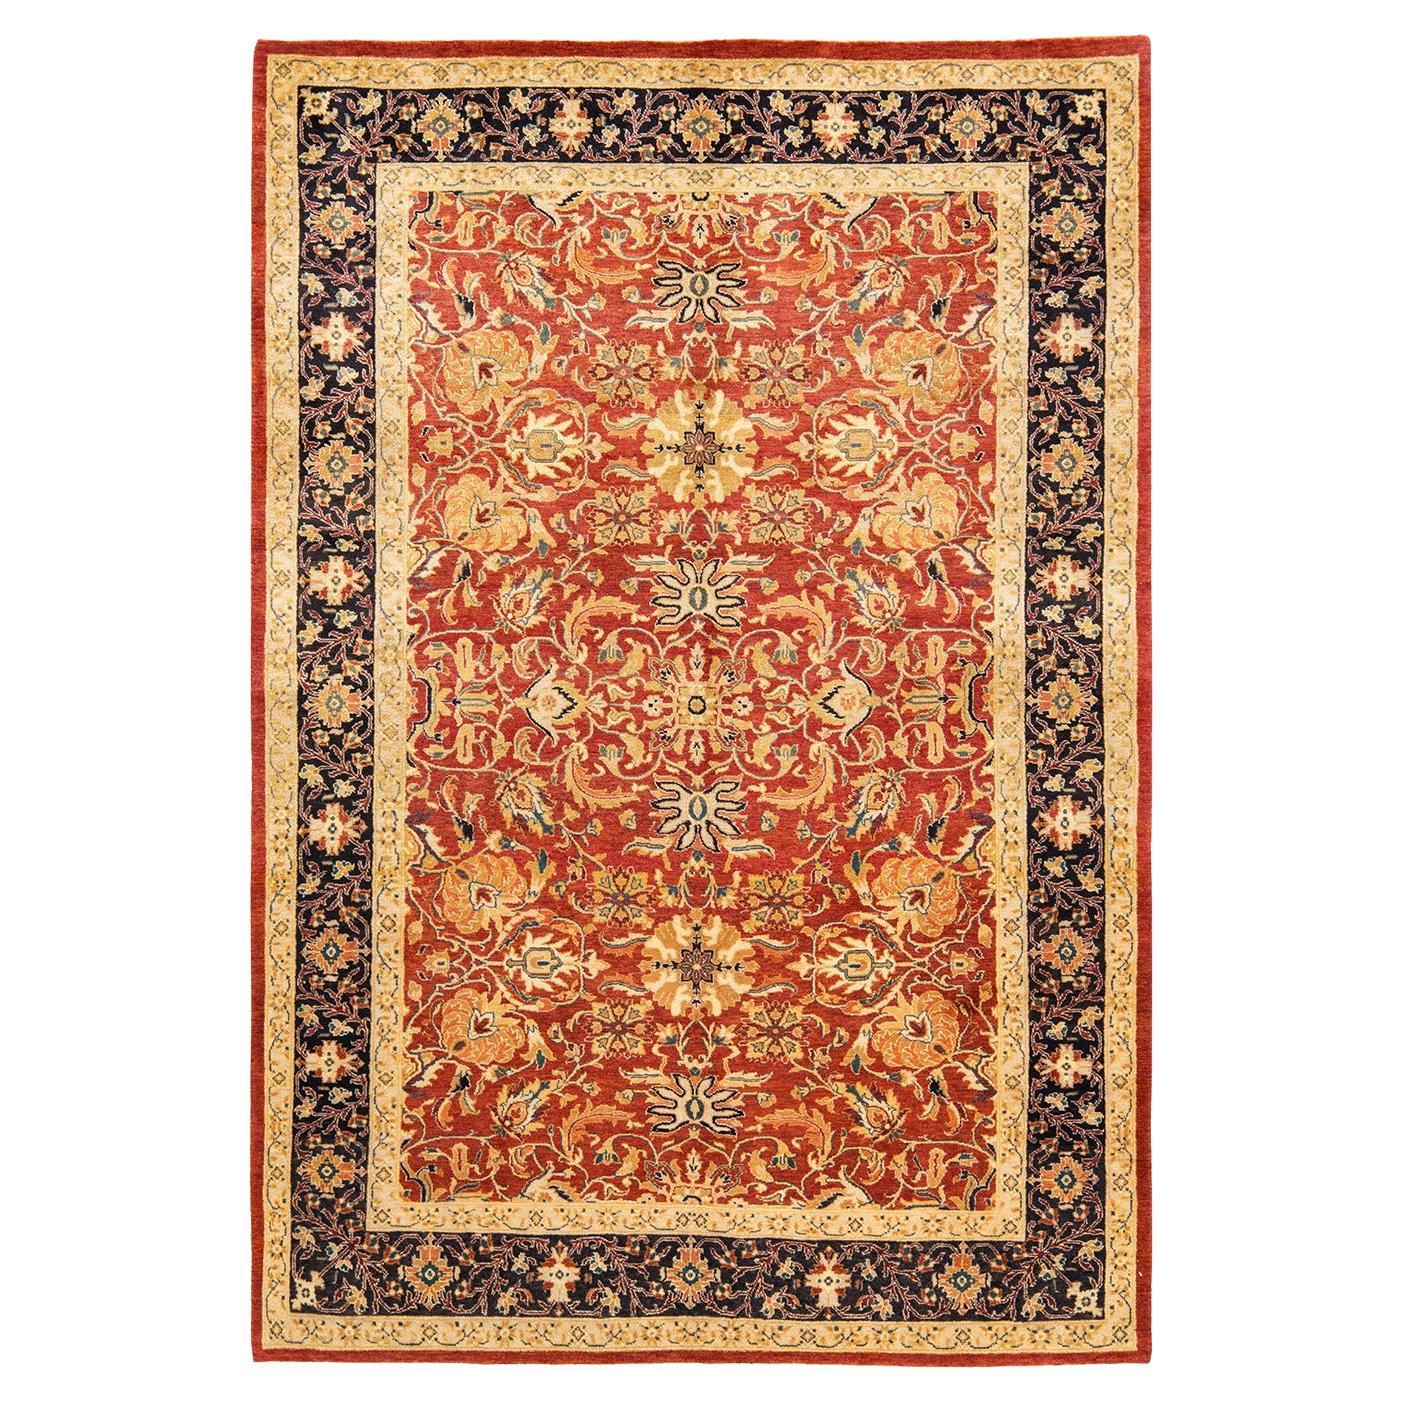 One-Of-A-Kind Hand Knotted Floral Eclectic Orange Area Rug